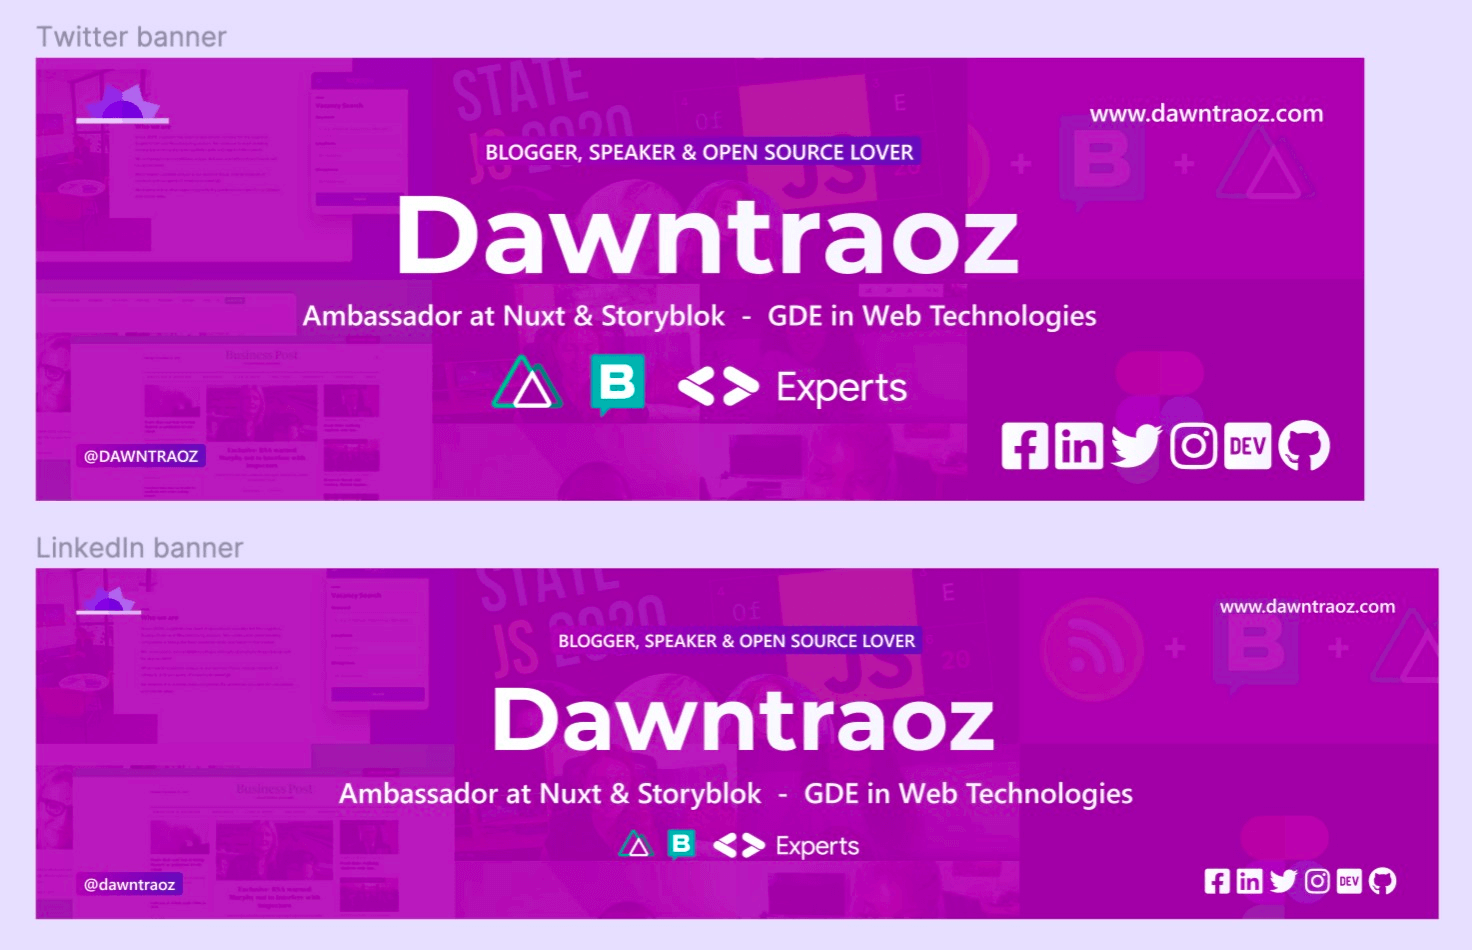 Social banner image for dawntraoz's networks designed in Figma